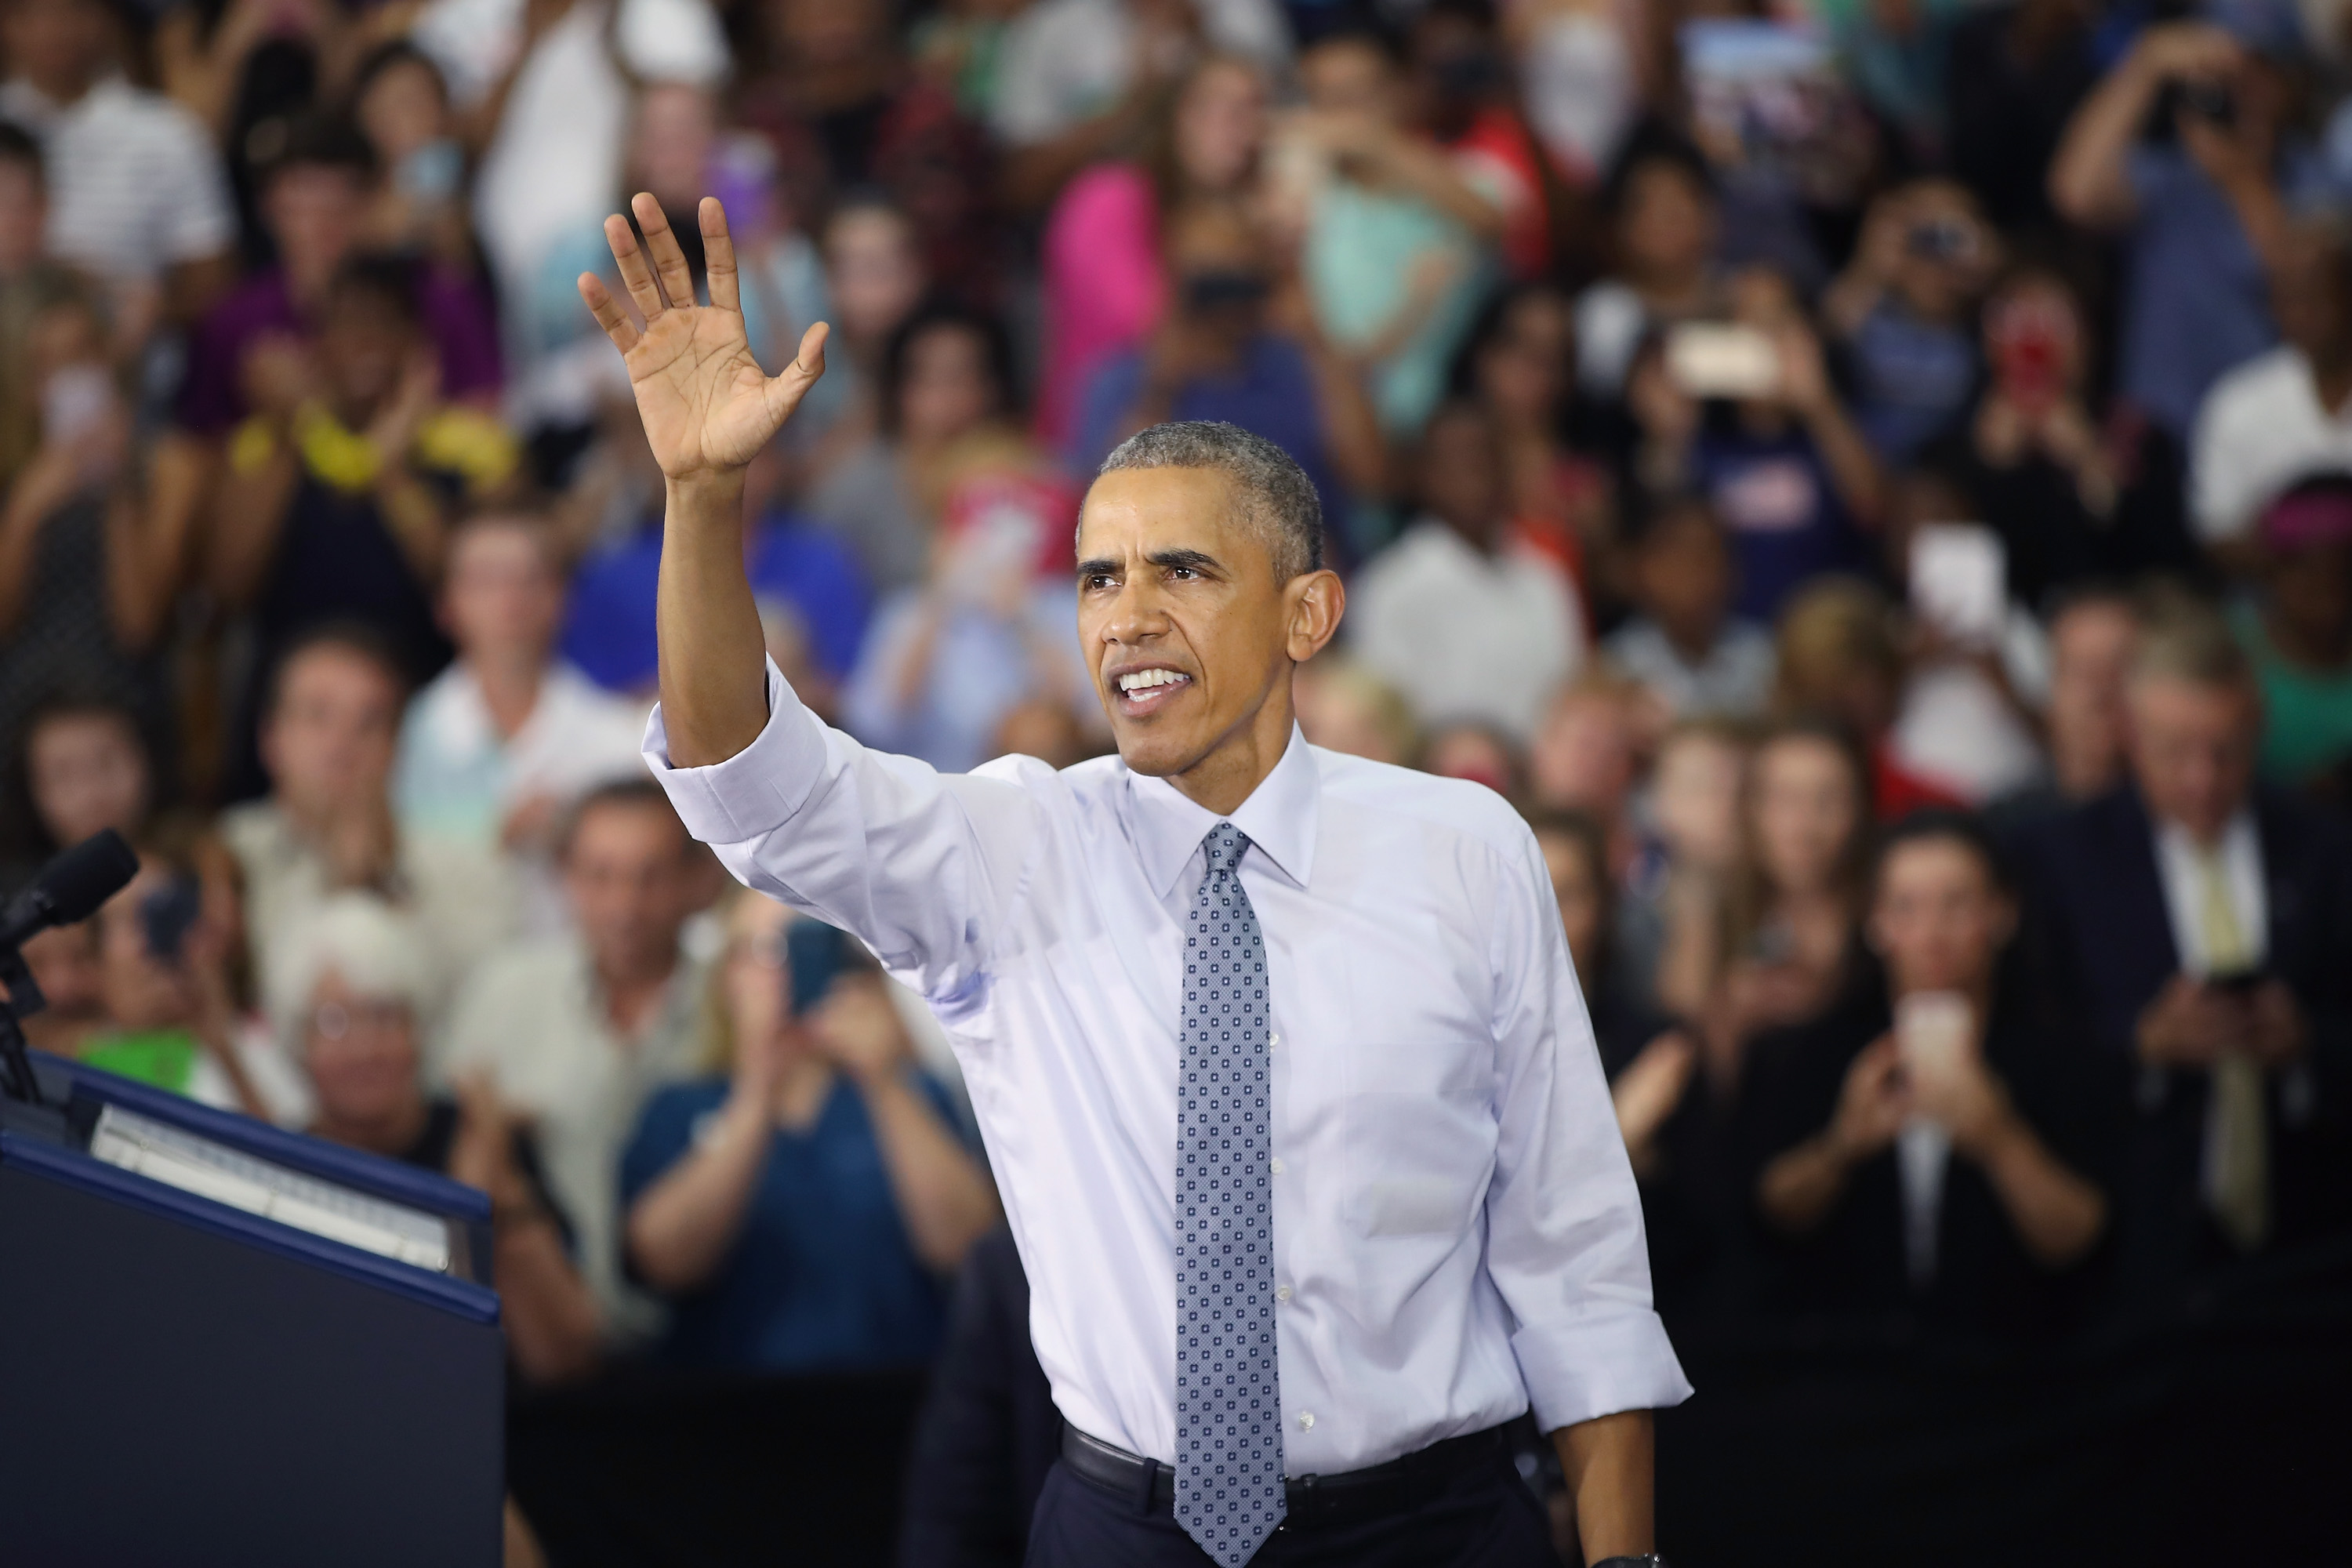 President Barack Obama waves to the crowd at Concord Community High School as he leaves after speaking on June 1, 2016 in Elkhart, Indiana. Obama returned to the school, which he visited more than seven years ago, to highlight economic progress made during his administration. Scott Olson&mdash;Getty Images (Scott Olson&mdash;Getty Images)